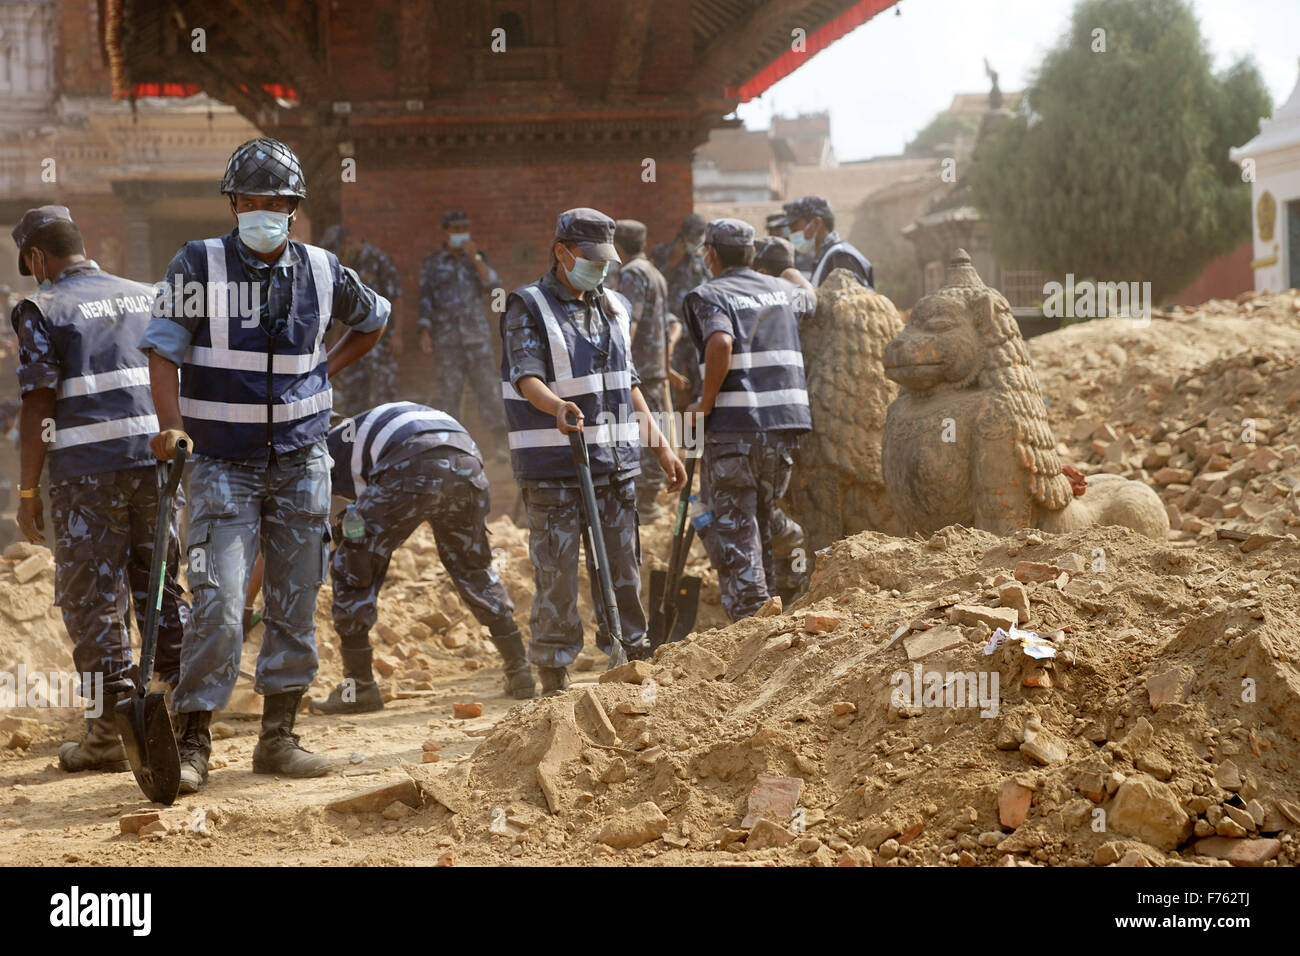 Police personnel clearing debris, krishna temple, nepal, asia Stock Photo